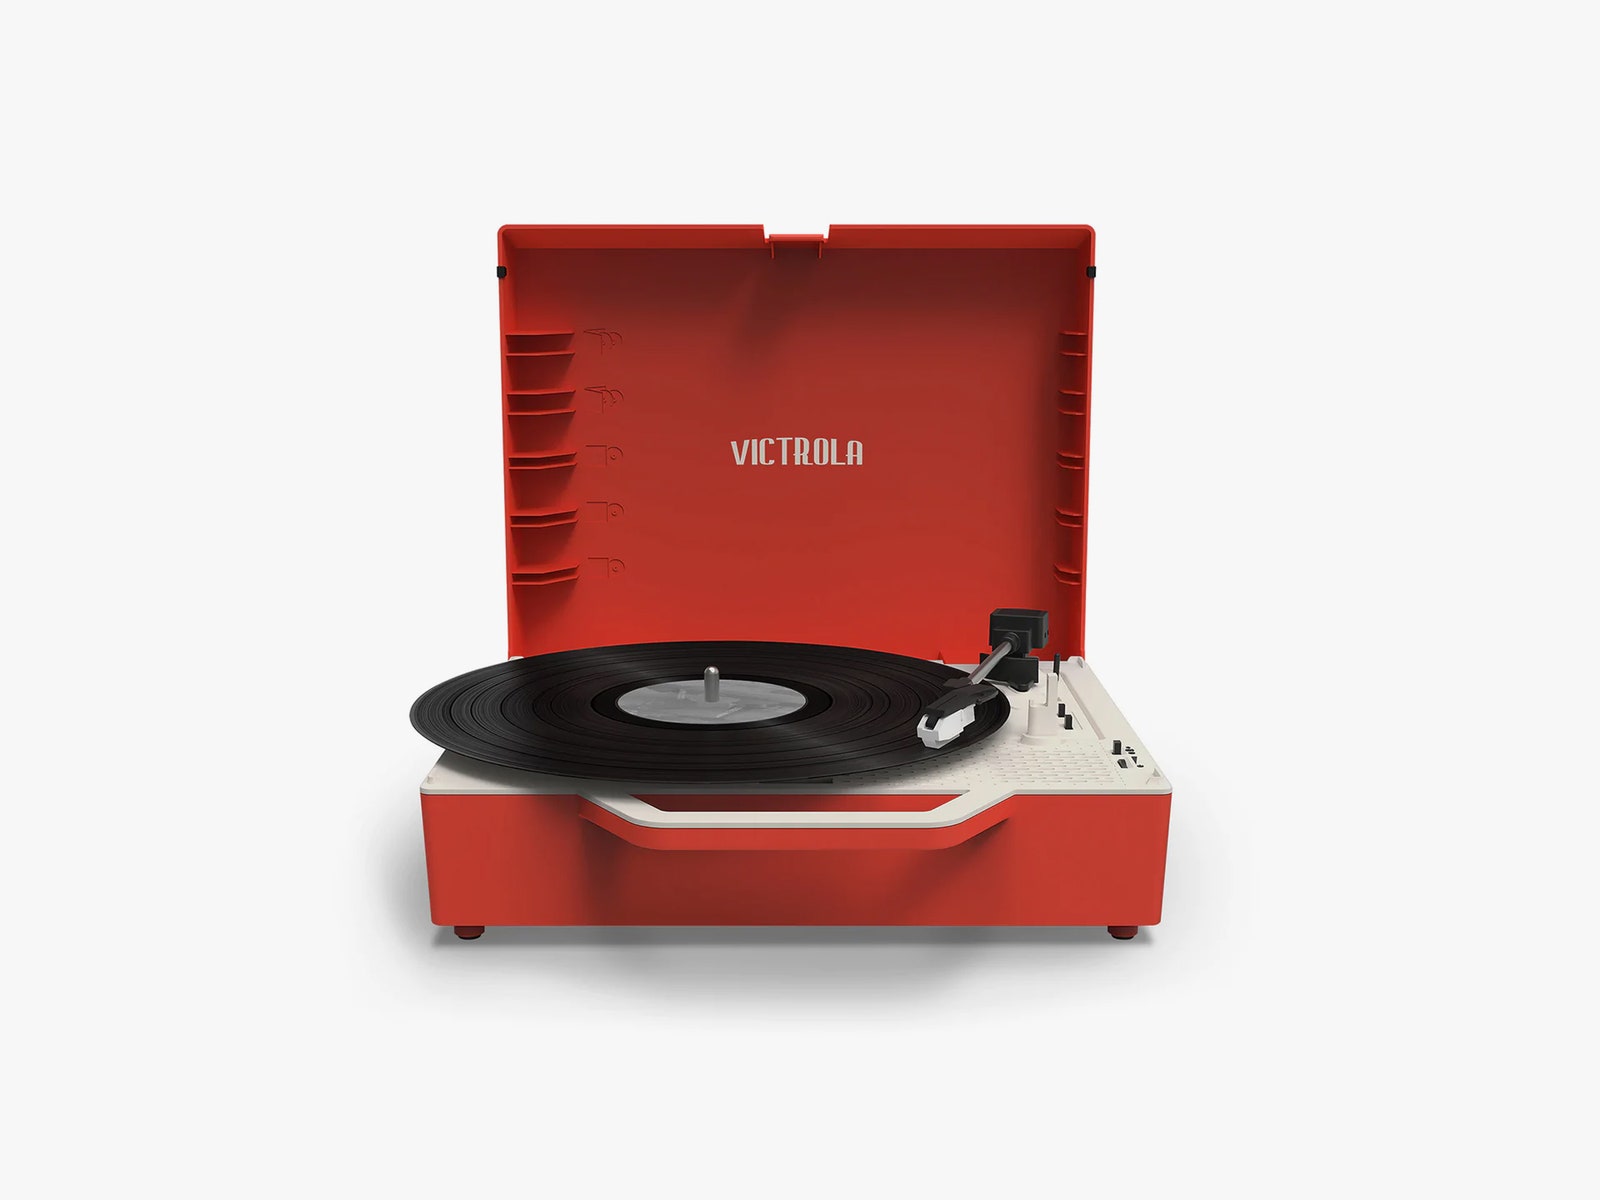 Victrola ReSpin turntable